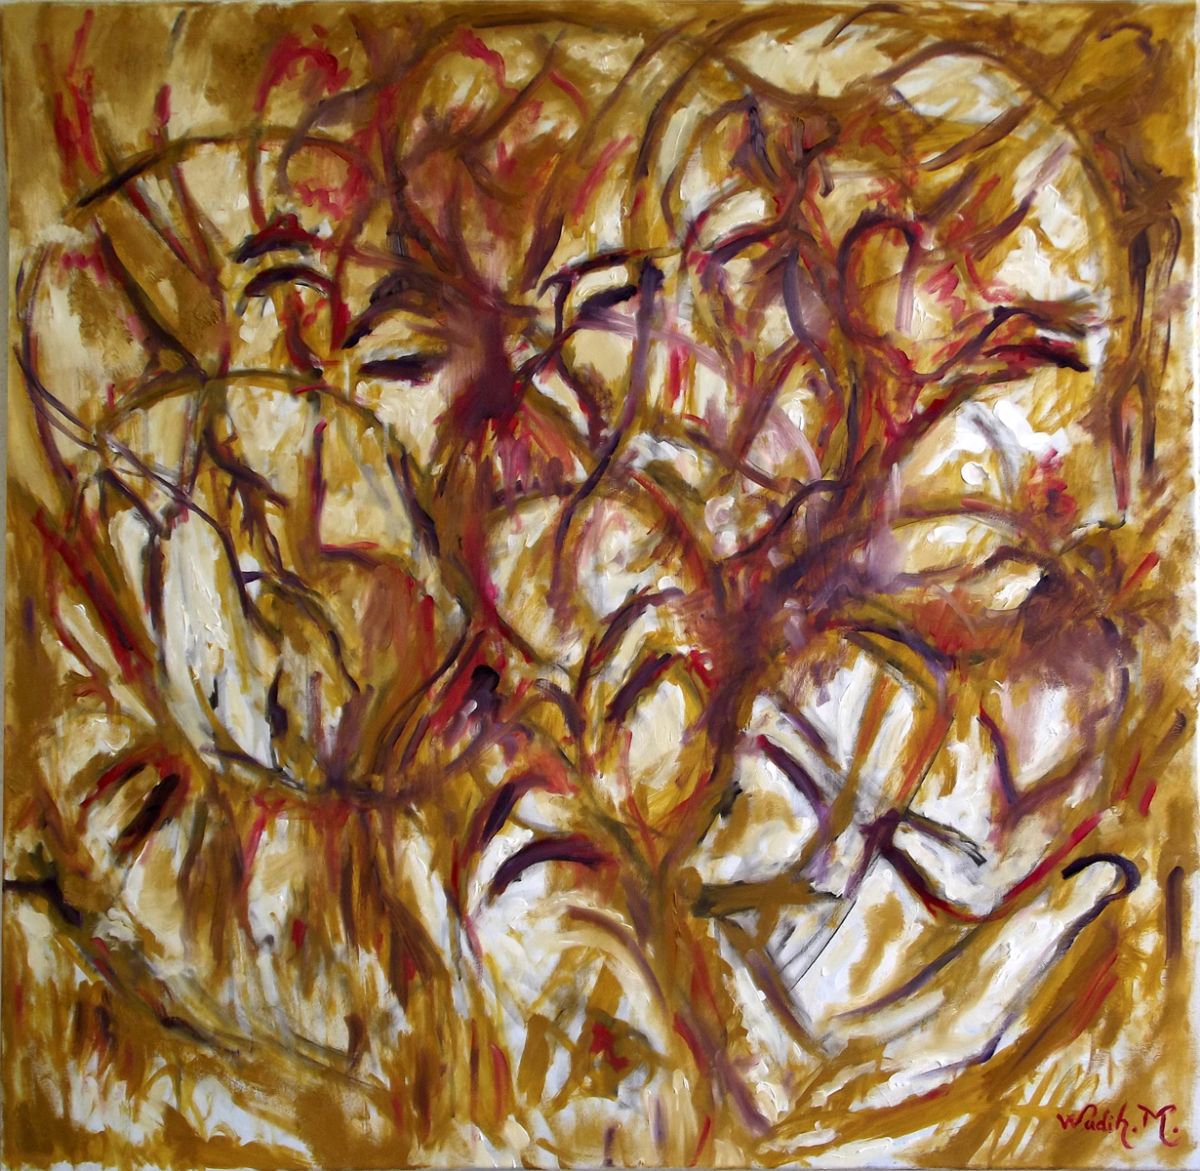 THE CHAOS - Illusionistic figures - Face combination - Big size Oil on canvas (100x100cm) by Wadih Maalouf